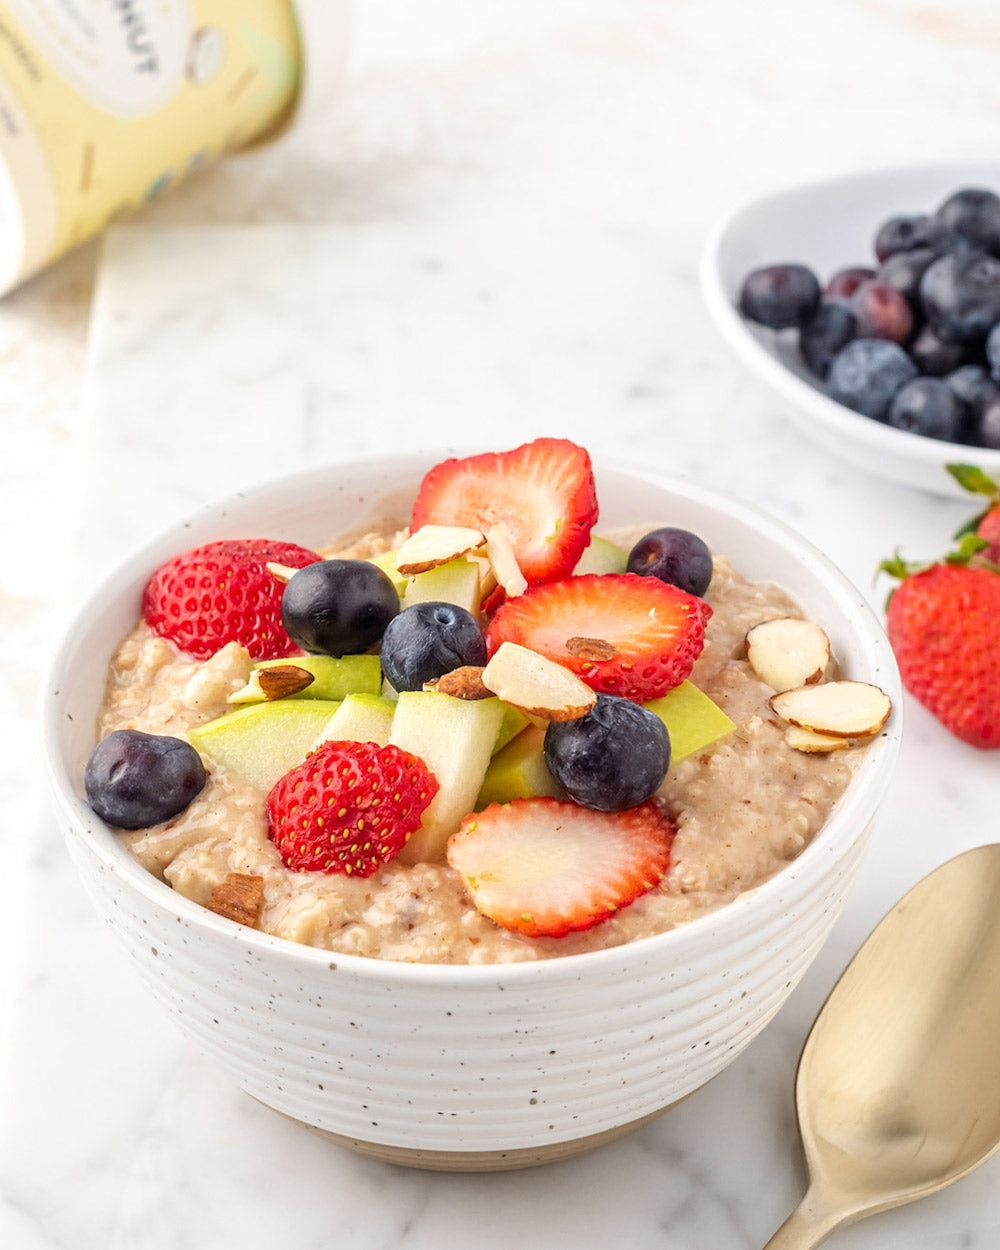 Is Instant Oatmeal Healthy?